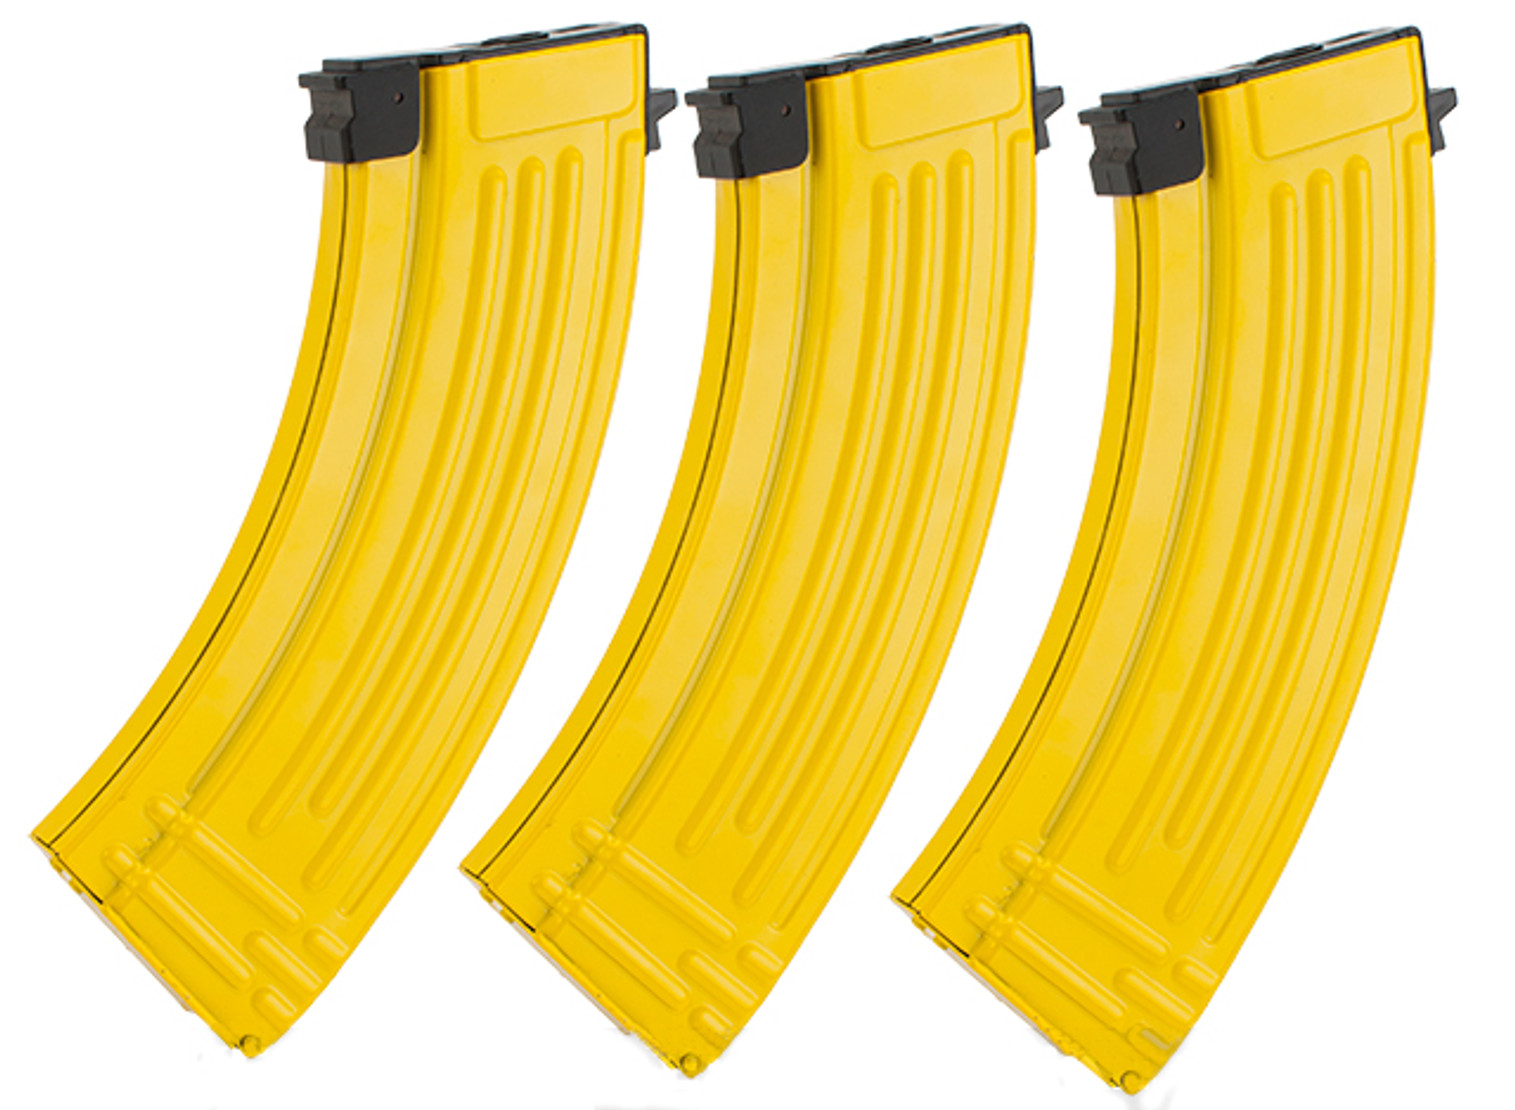 AK Banana Clips: Get Your Banana Mag and Morale Patch